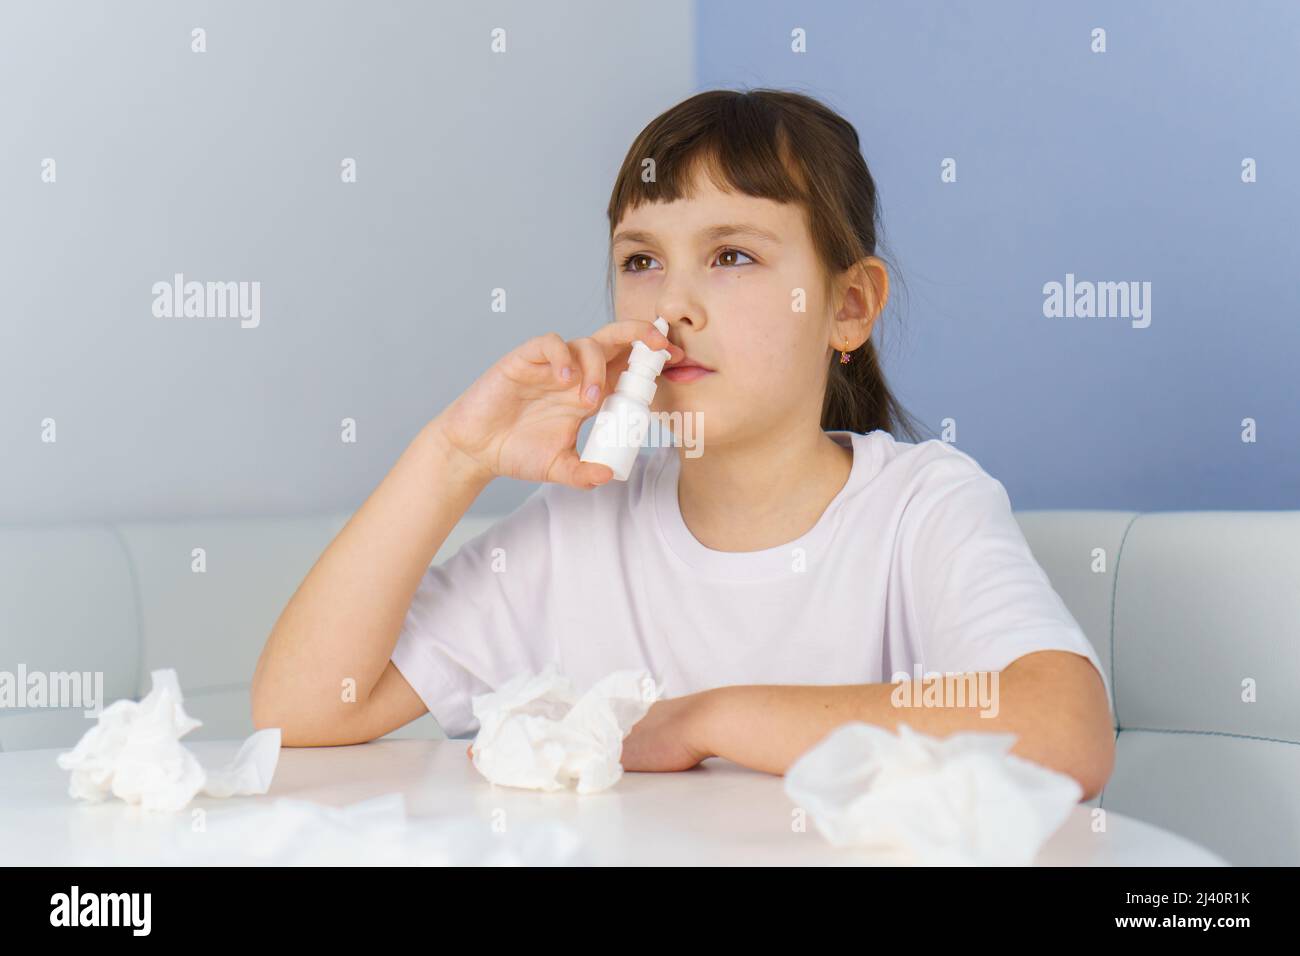 Little girl with runny nose does nasal spray irrigations to stop allergic rhinitis and sinusitis Stock Photo